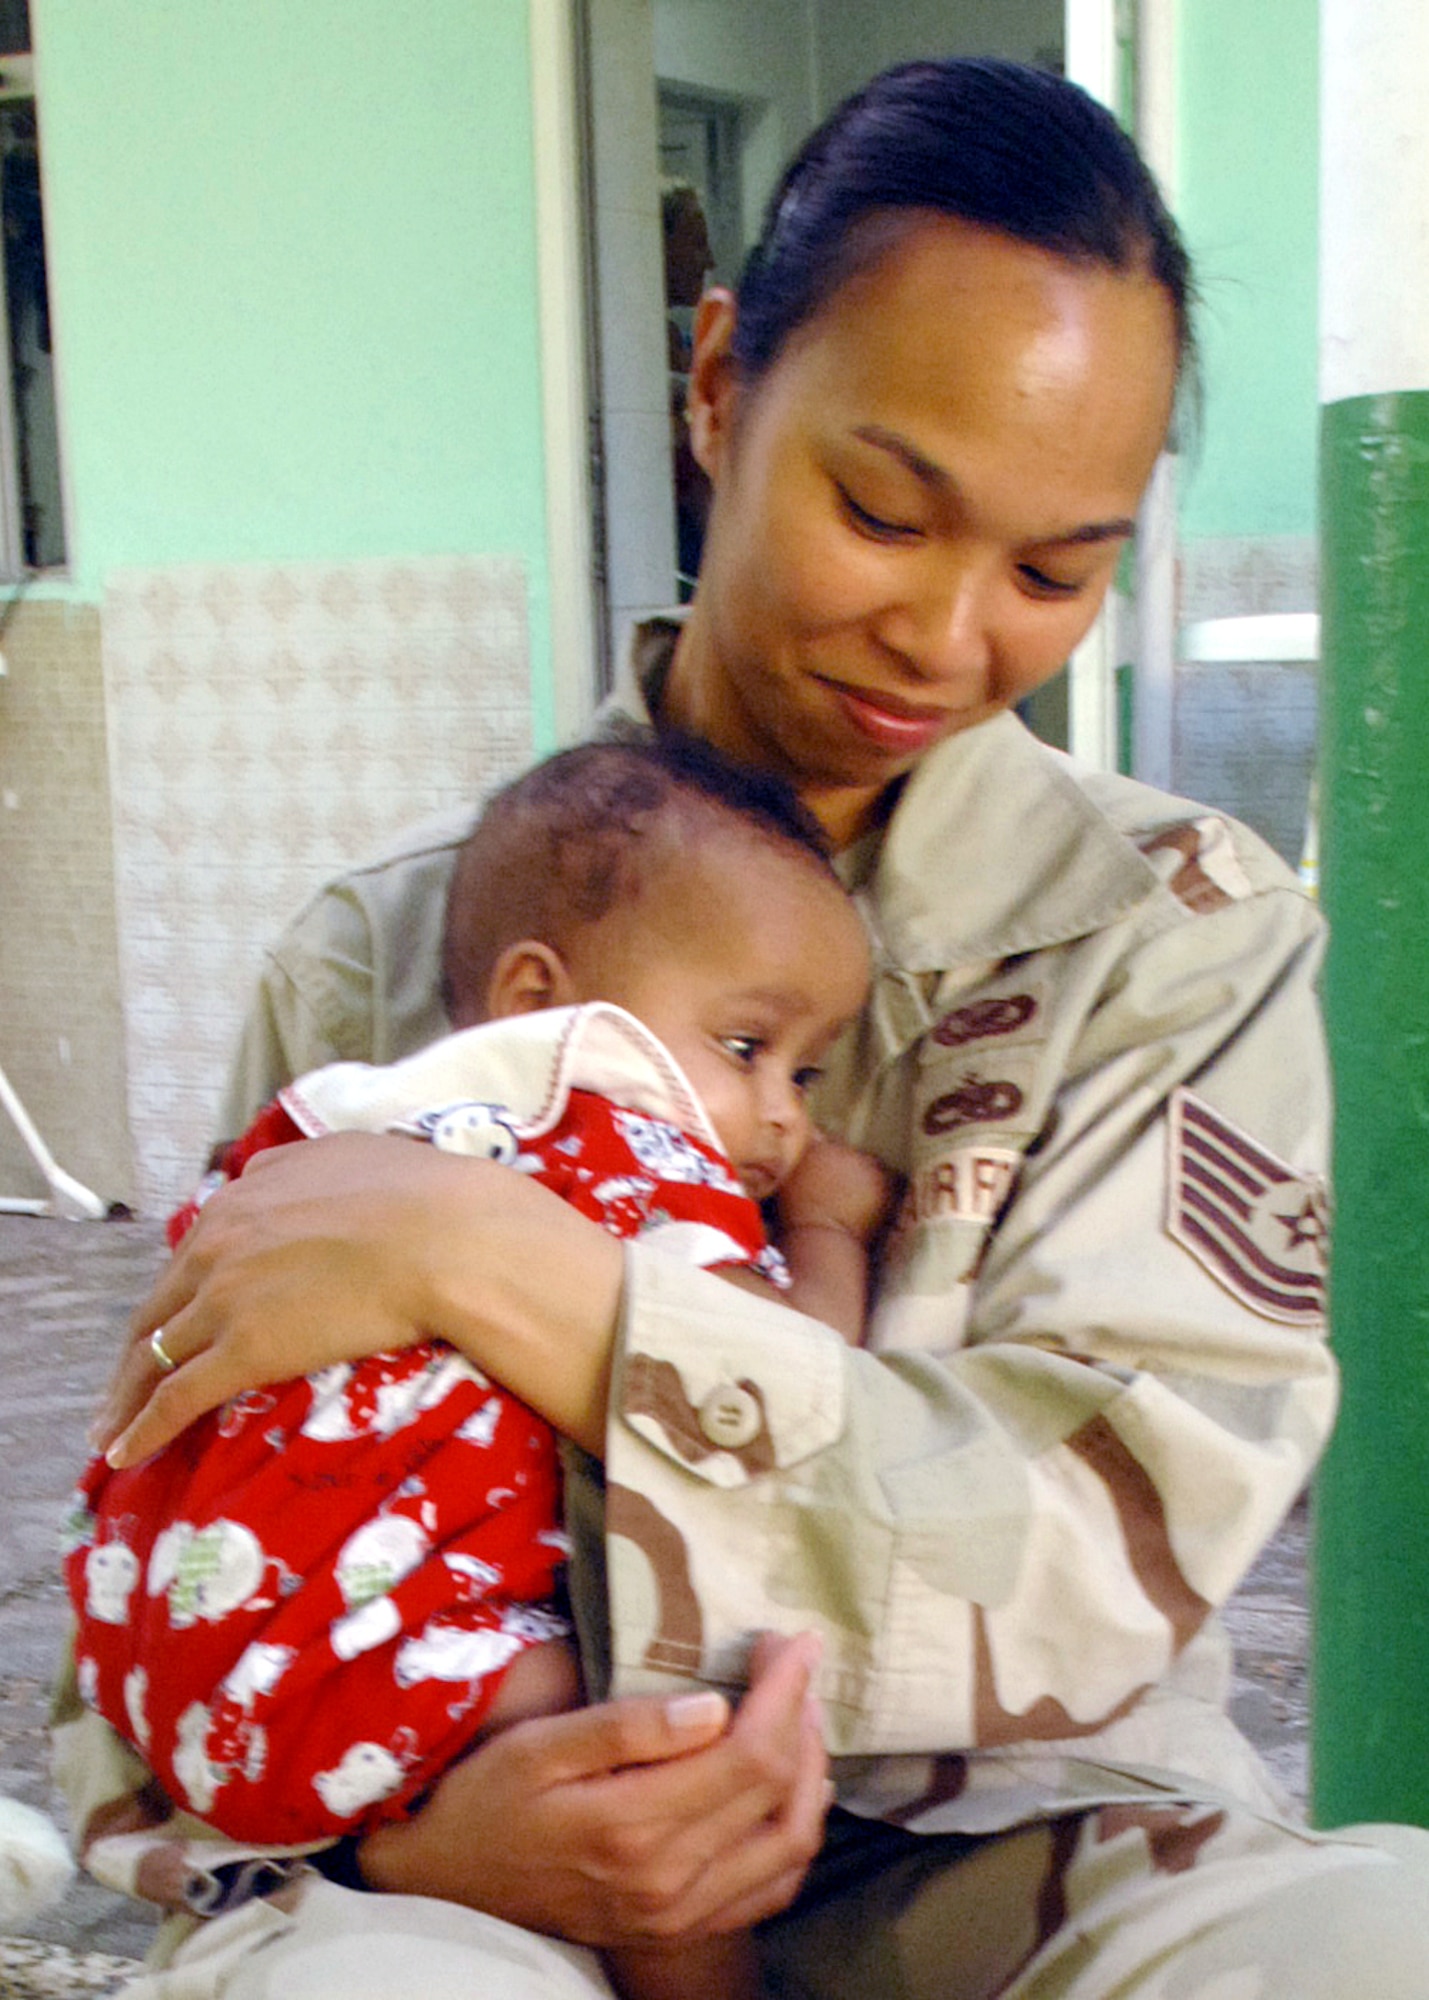 Tech. Sgt. Renee Crisostomo comforts an orphaned baby at the Franciscan Missionaries of Notre Dame Baby Orphanage in Djibouti City, Djibouti. Sergeant Crisostomo, a broadcaster on the U.S. Central Command Air Forces News Team, was on assignment to feature Airmen supporting the Combined Joint Task Force - Horn of Africa at Camp Lemonier, Djibouti, when she paused filming and volunteered at the orphanage. The Camp Lemonier chapel staff arranges visits to this orphanage three times a week. (U.S. Air Force photo/Staff Sgt. Francesca Popp)